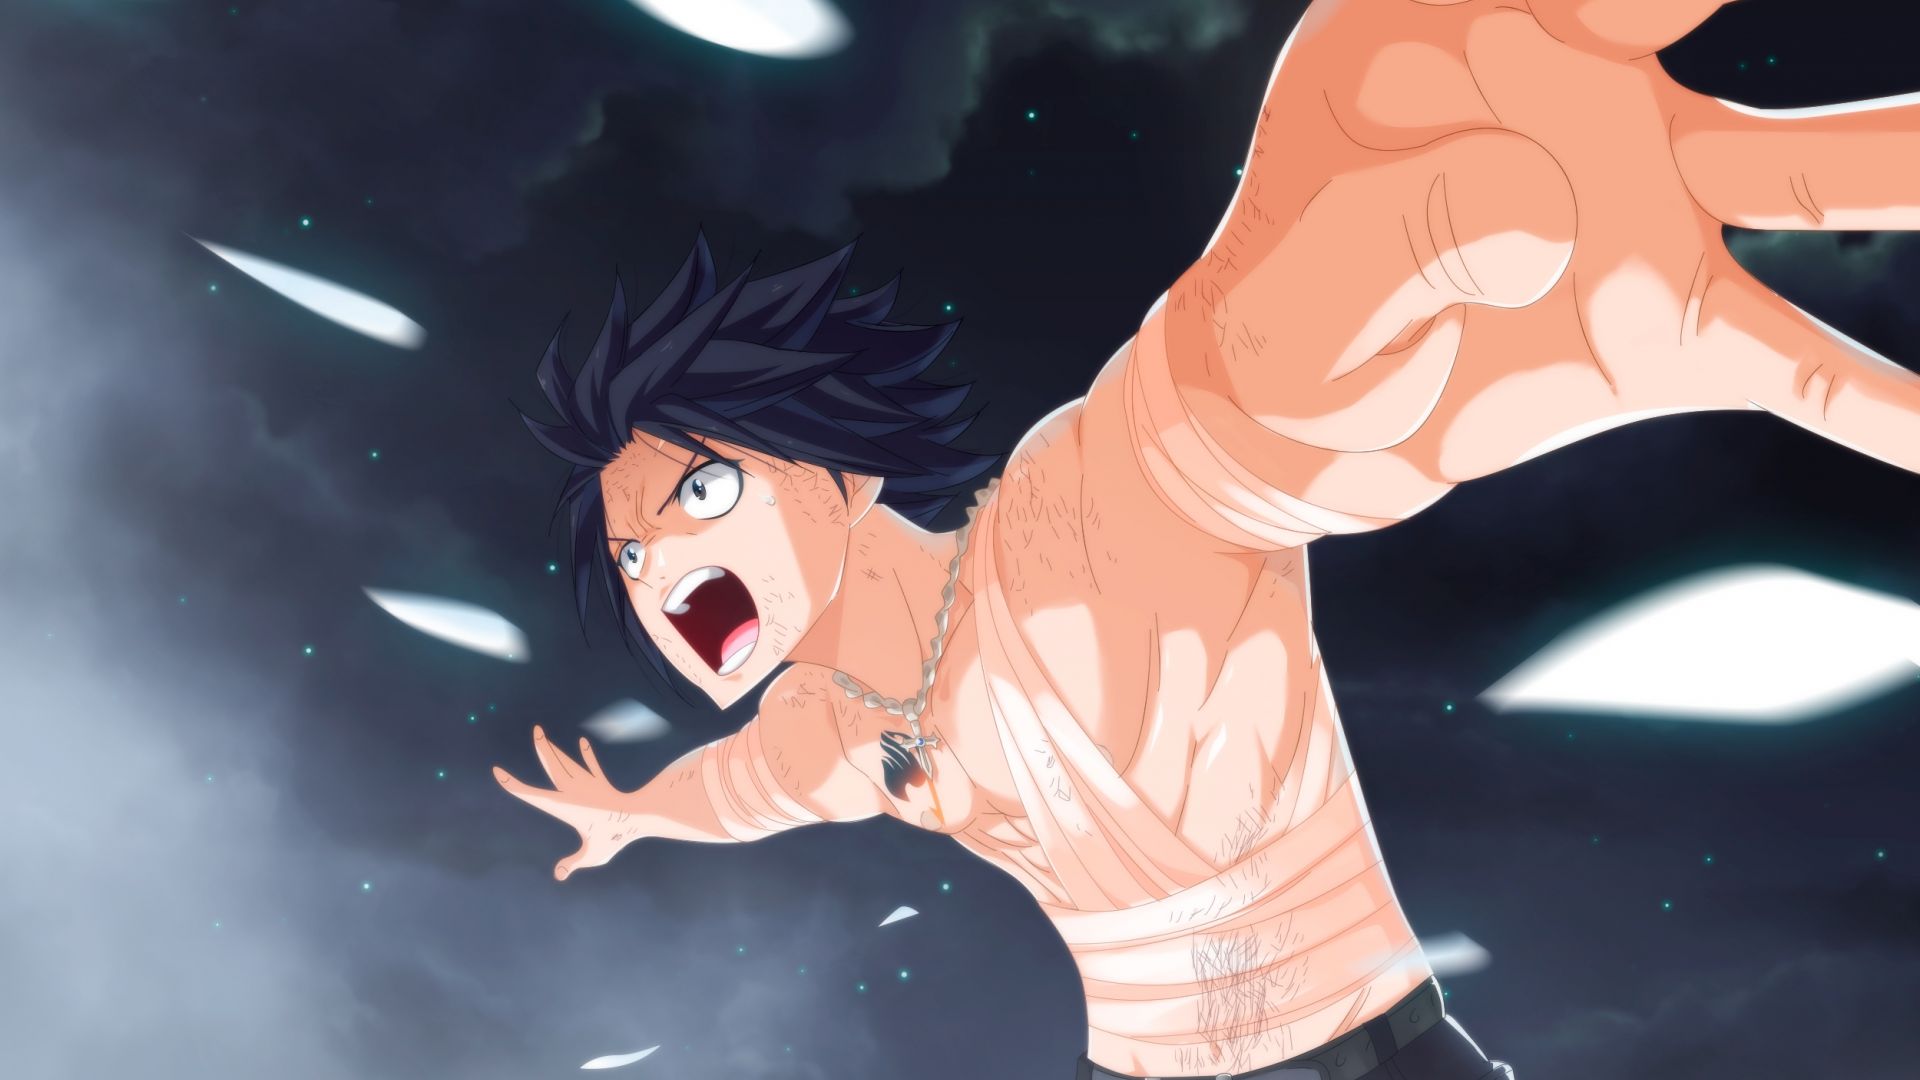 Wallpaper Gray Fullbuster, Fairy Tail, anime boy without shirt